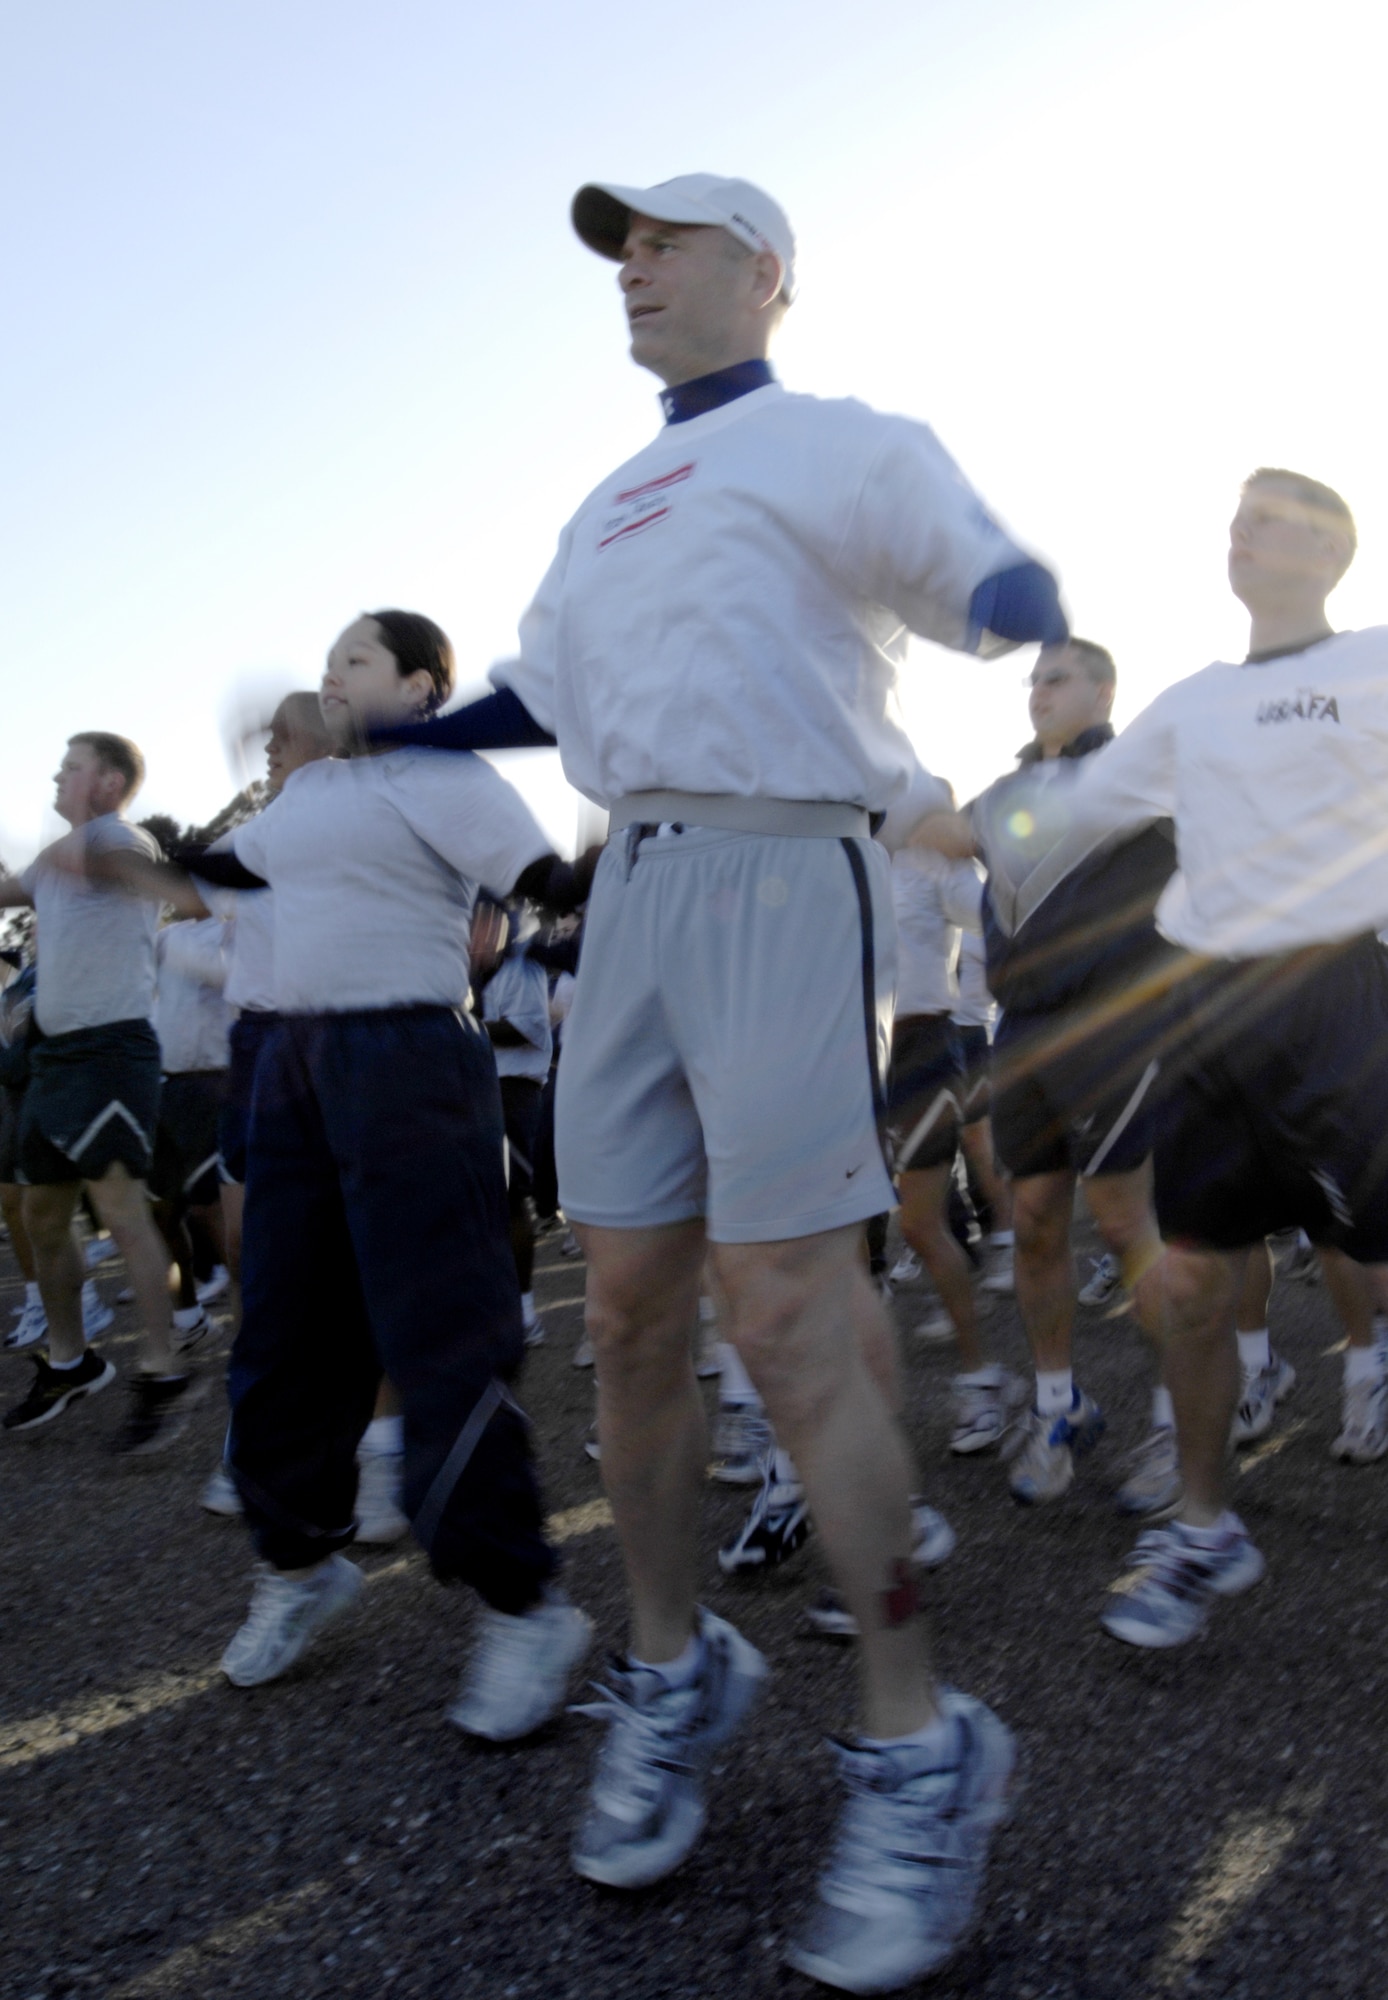 Andy "Iron Man" Holder leads the June Fit to Fight run, doing jumping jacks with Airmen from the 30th Logistics Readiness Squadron.  Mr. Holder developed type I diabetes later in life, and chose to become an Iron Man athelete and motivational speaker. (U.S. Air Force photo/Airman Jonathan Olds)